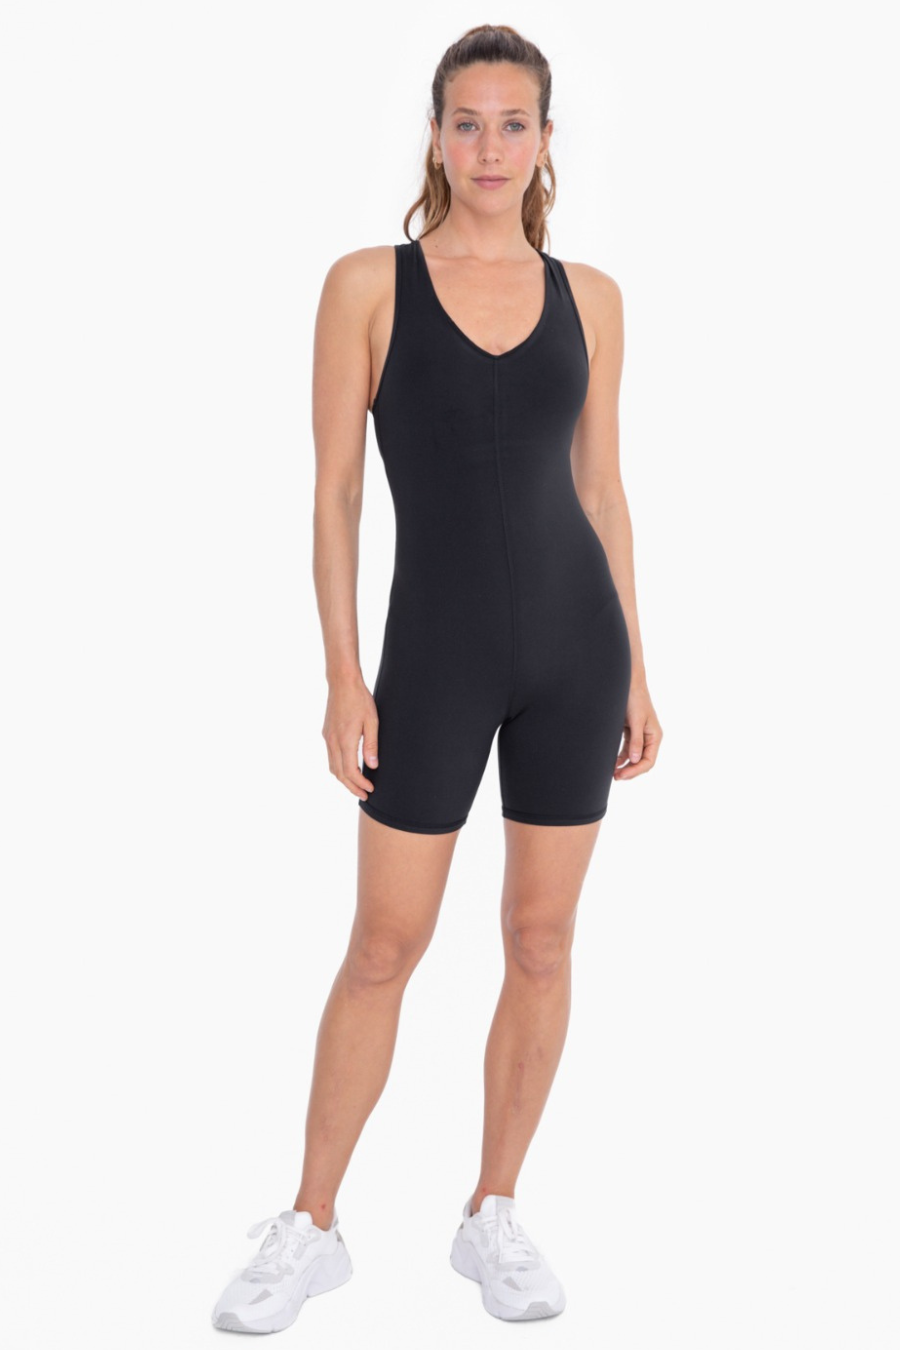 Full front view of the racerback v neck romper in black. model is wearing it with white tennis shoes.